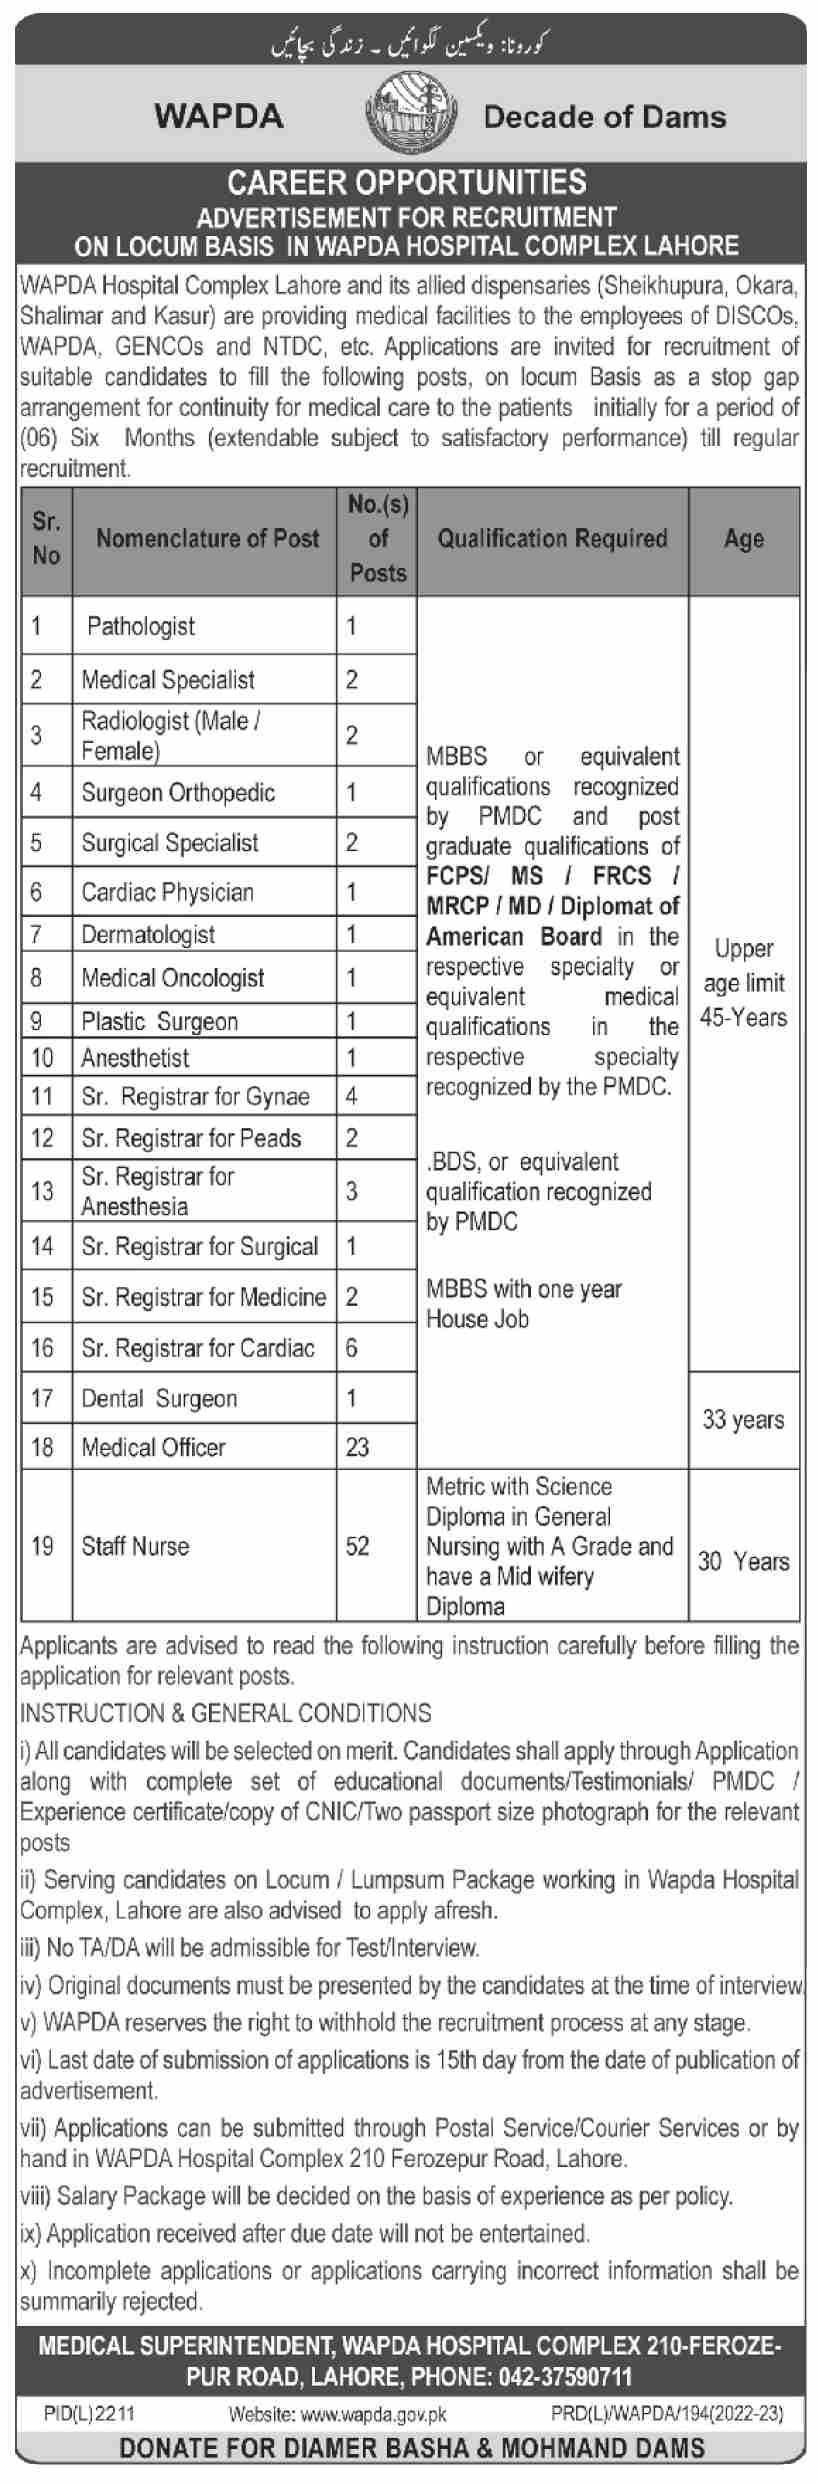 New jobs in WAPDA Hospital complex for 2023